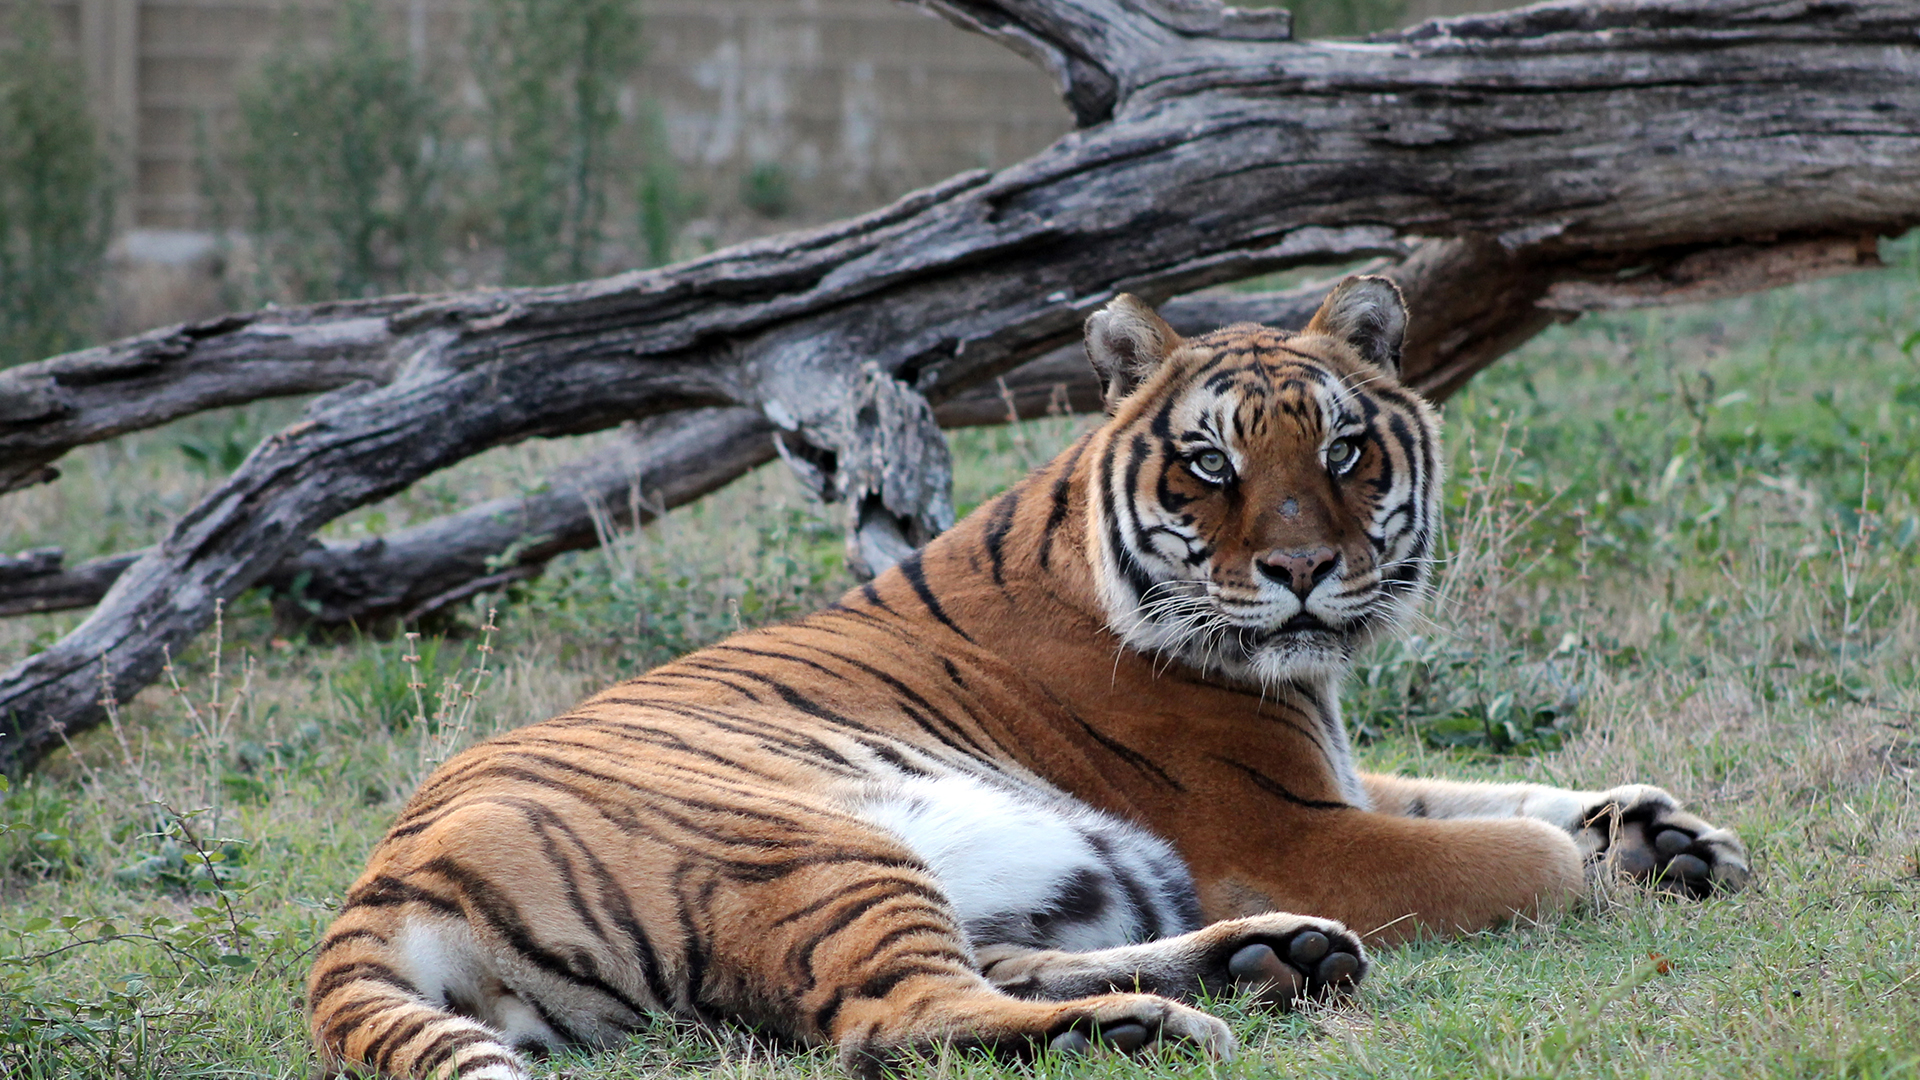 A tiger is lying on the grass with a fallen tree behind him